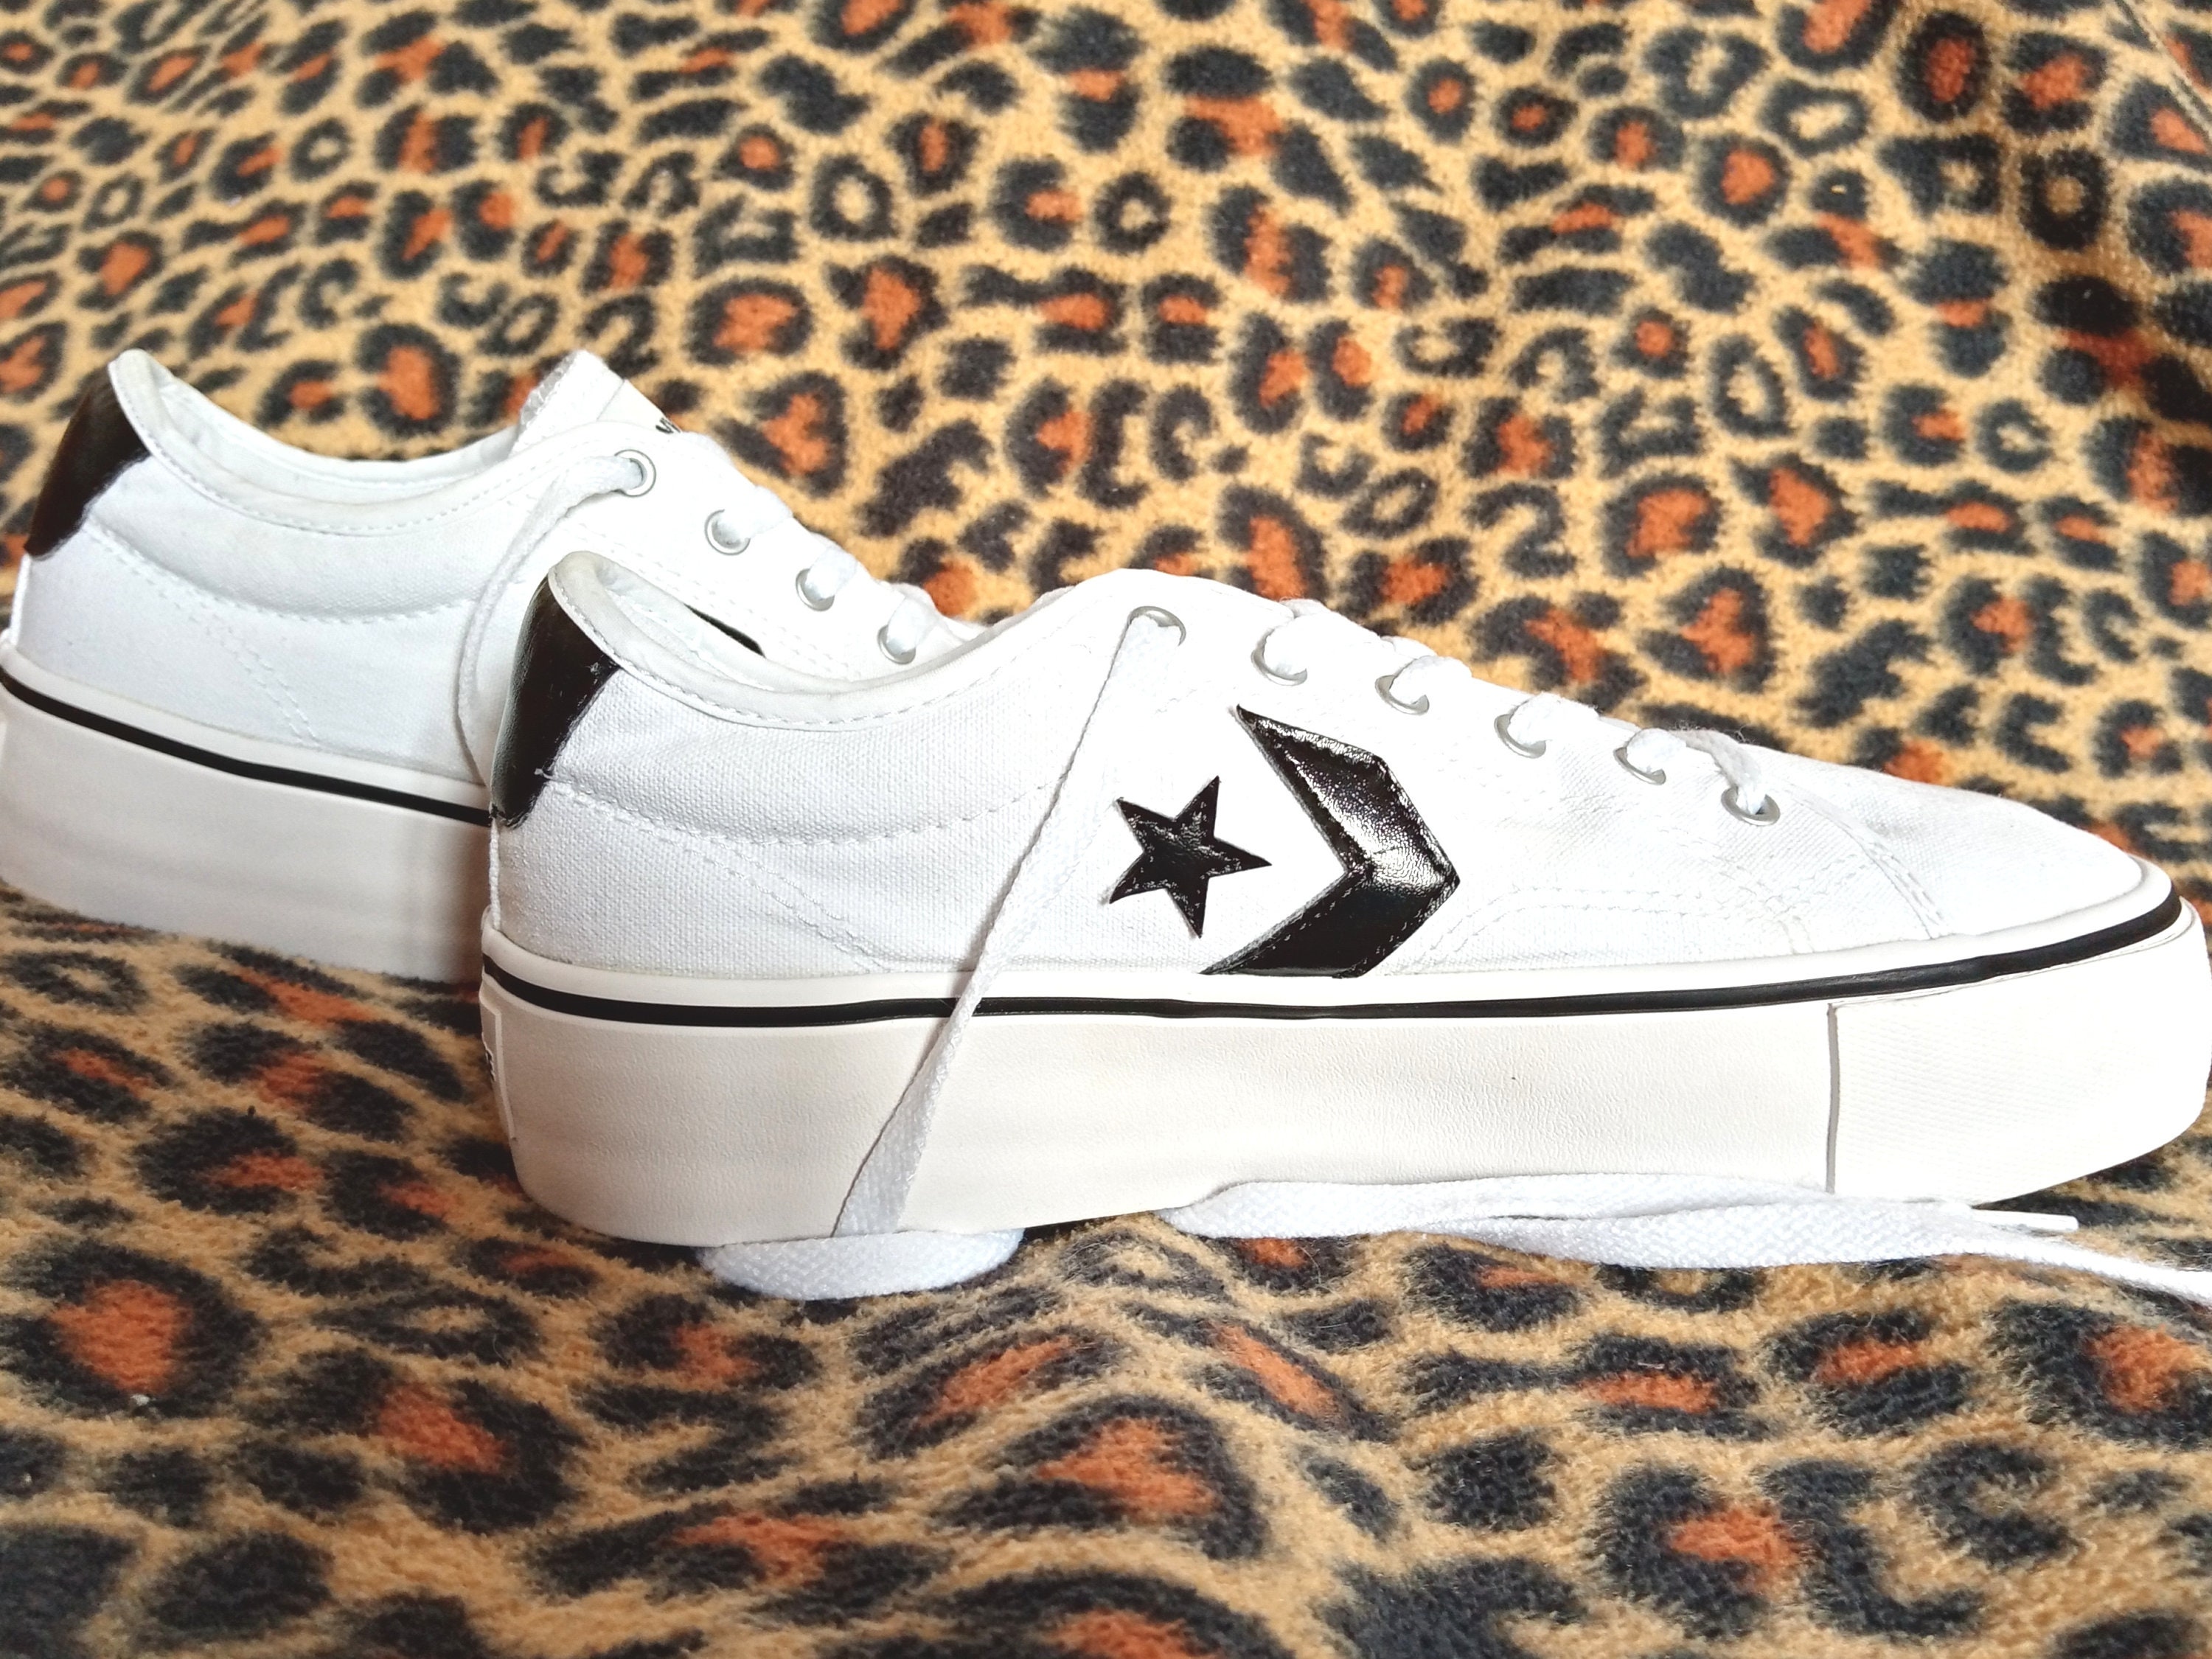 Converse Star Sneakers Black and White High Sole 41 - Etsy